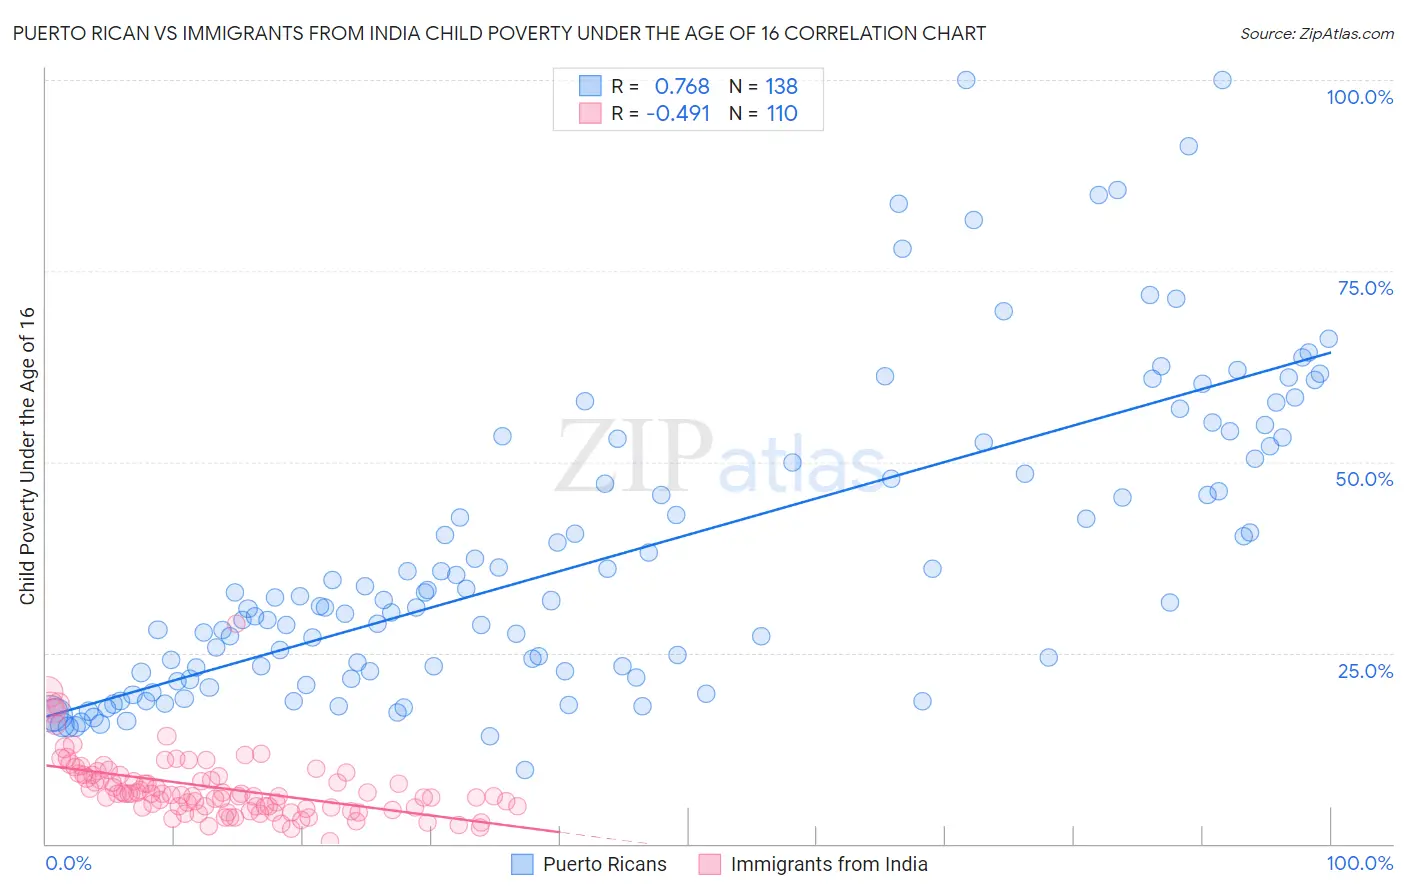 Puerto Rican vs Immigrants from India Child Poverty Under the Age of 16